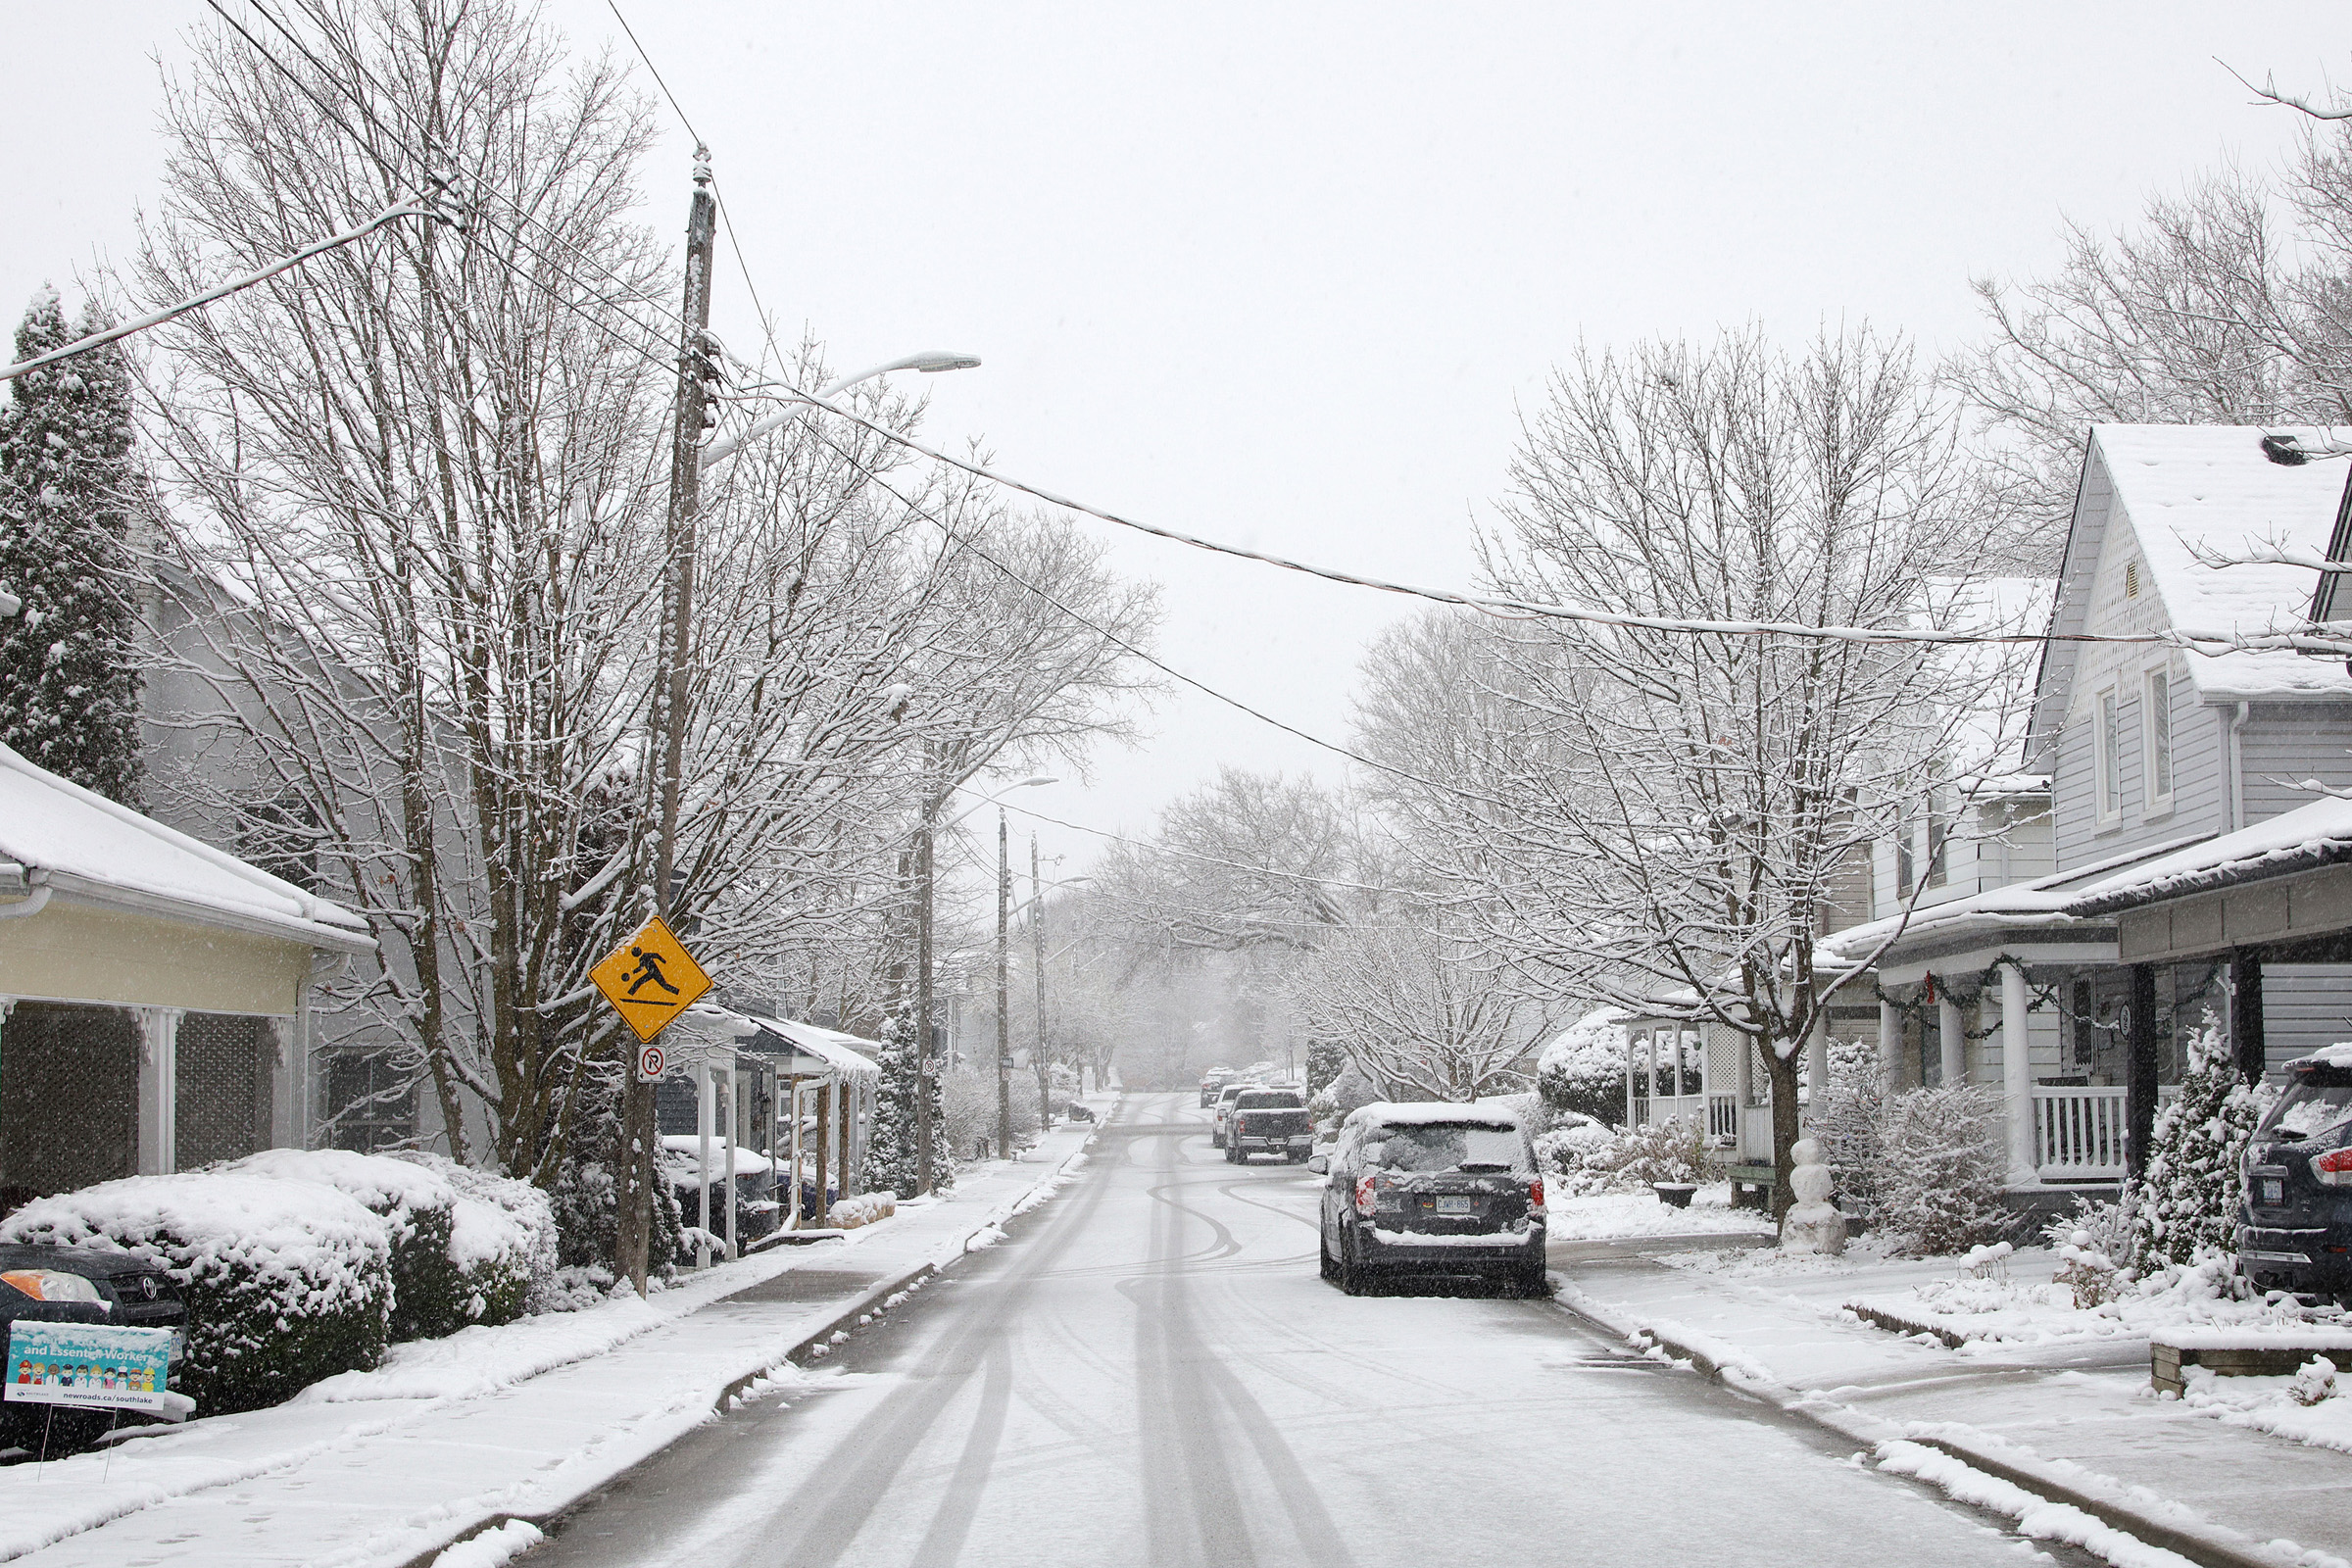 Winter weather travel advisory in effect for tonight into tomorrow - North  Bay News